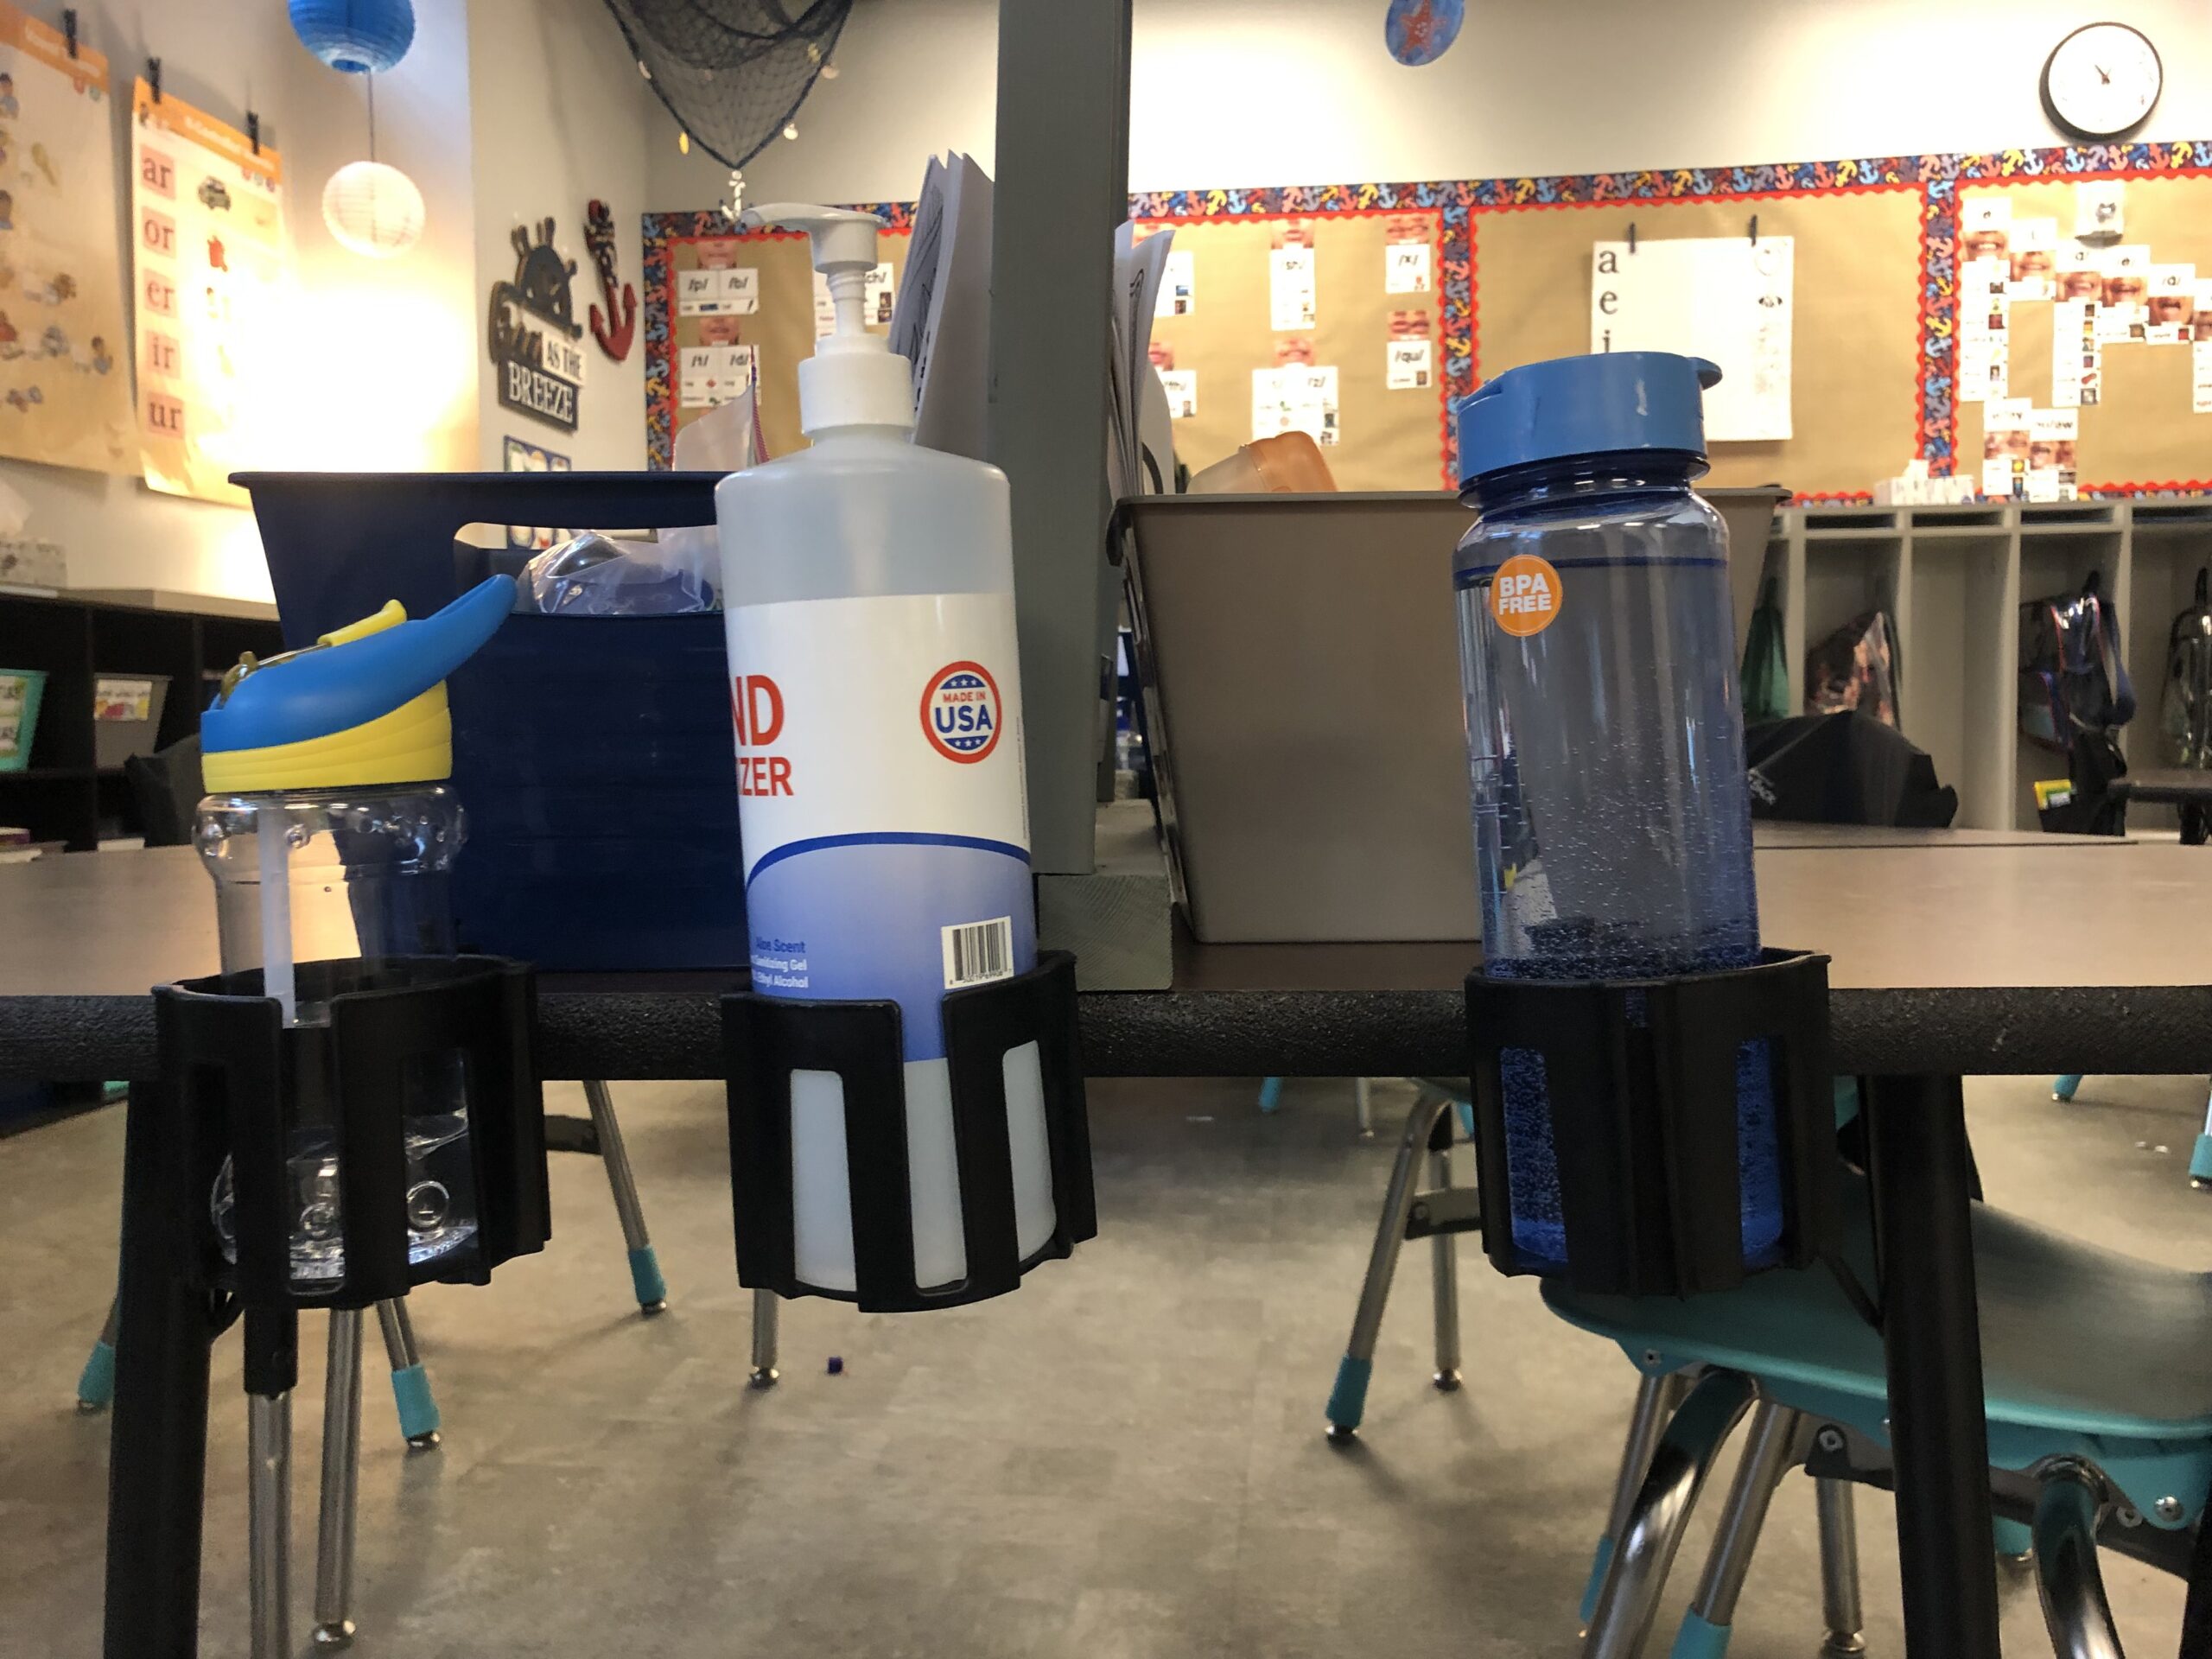 Cup Holster bottle holder attached to classroom desk, holding water bottle and cleaning wipes (Water Bottle Holders for Student Desks)